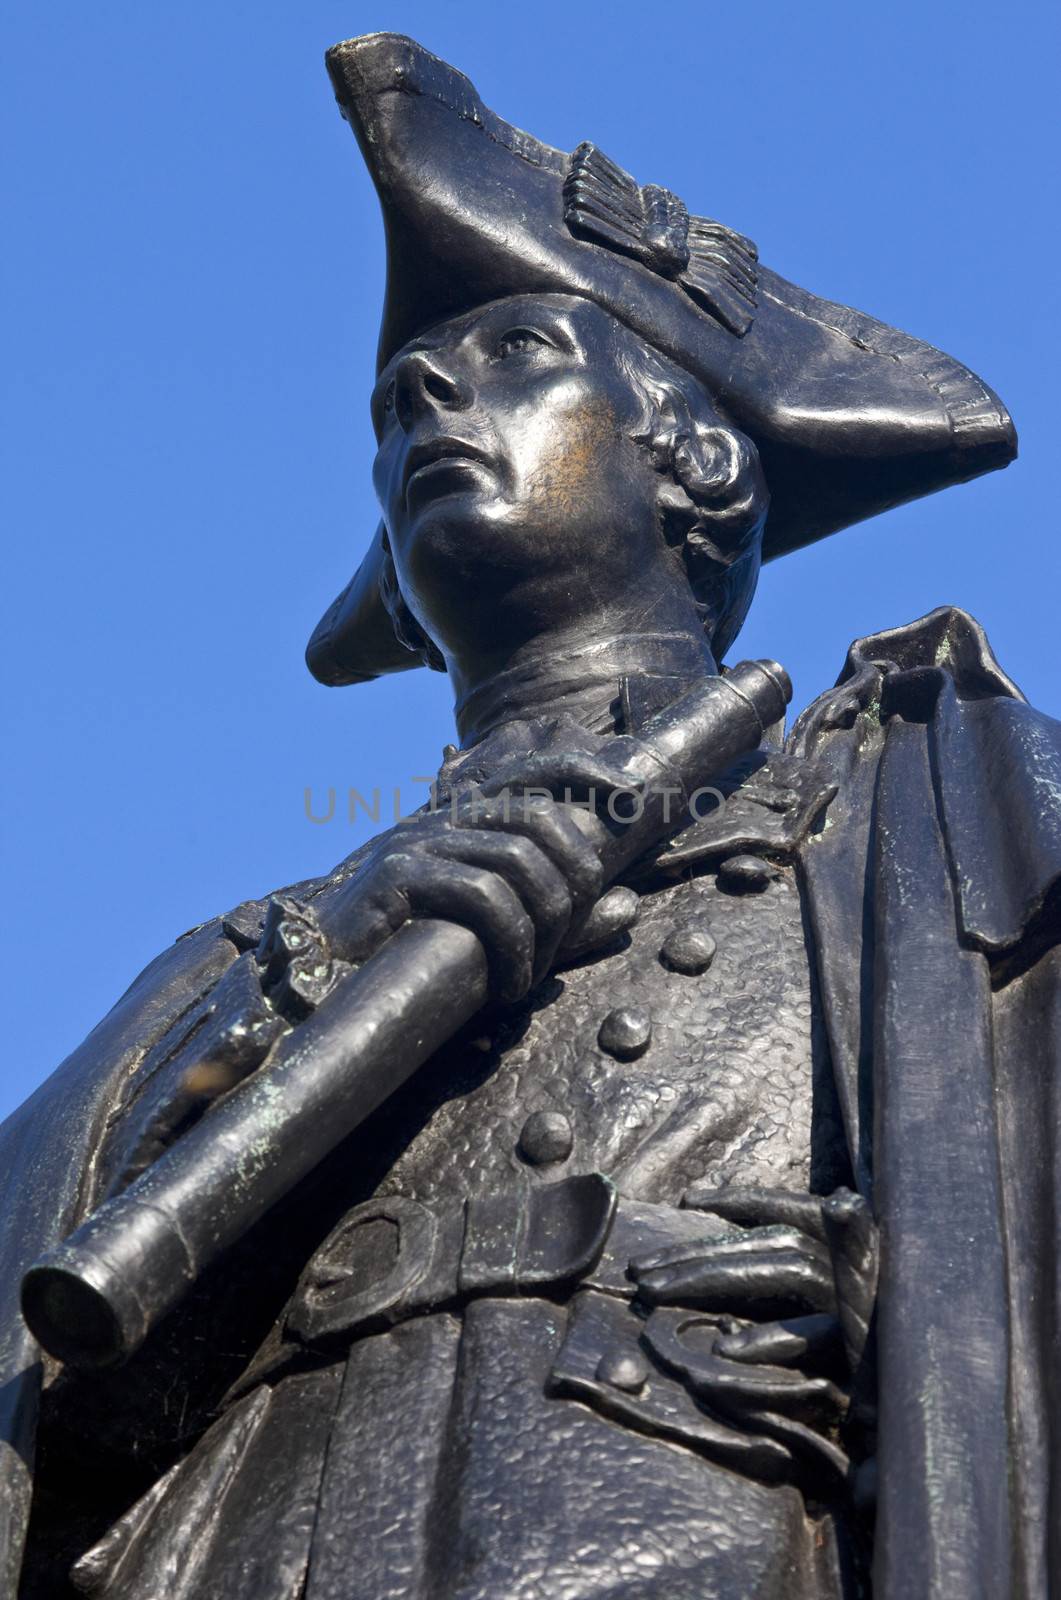 General James Wolfe Statue situated next to the Royal Observatory in Greenwich Park, London.